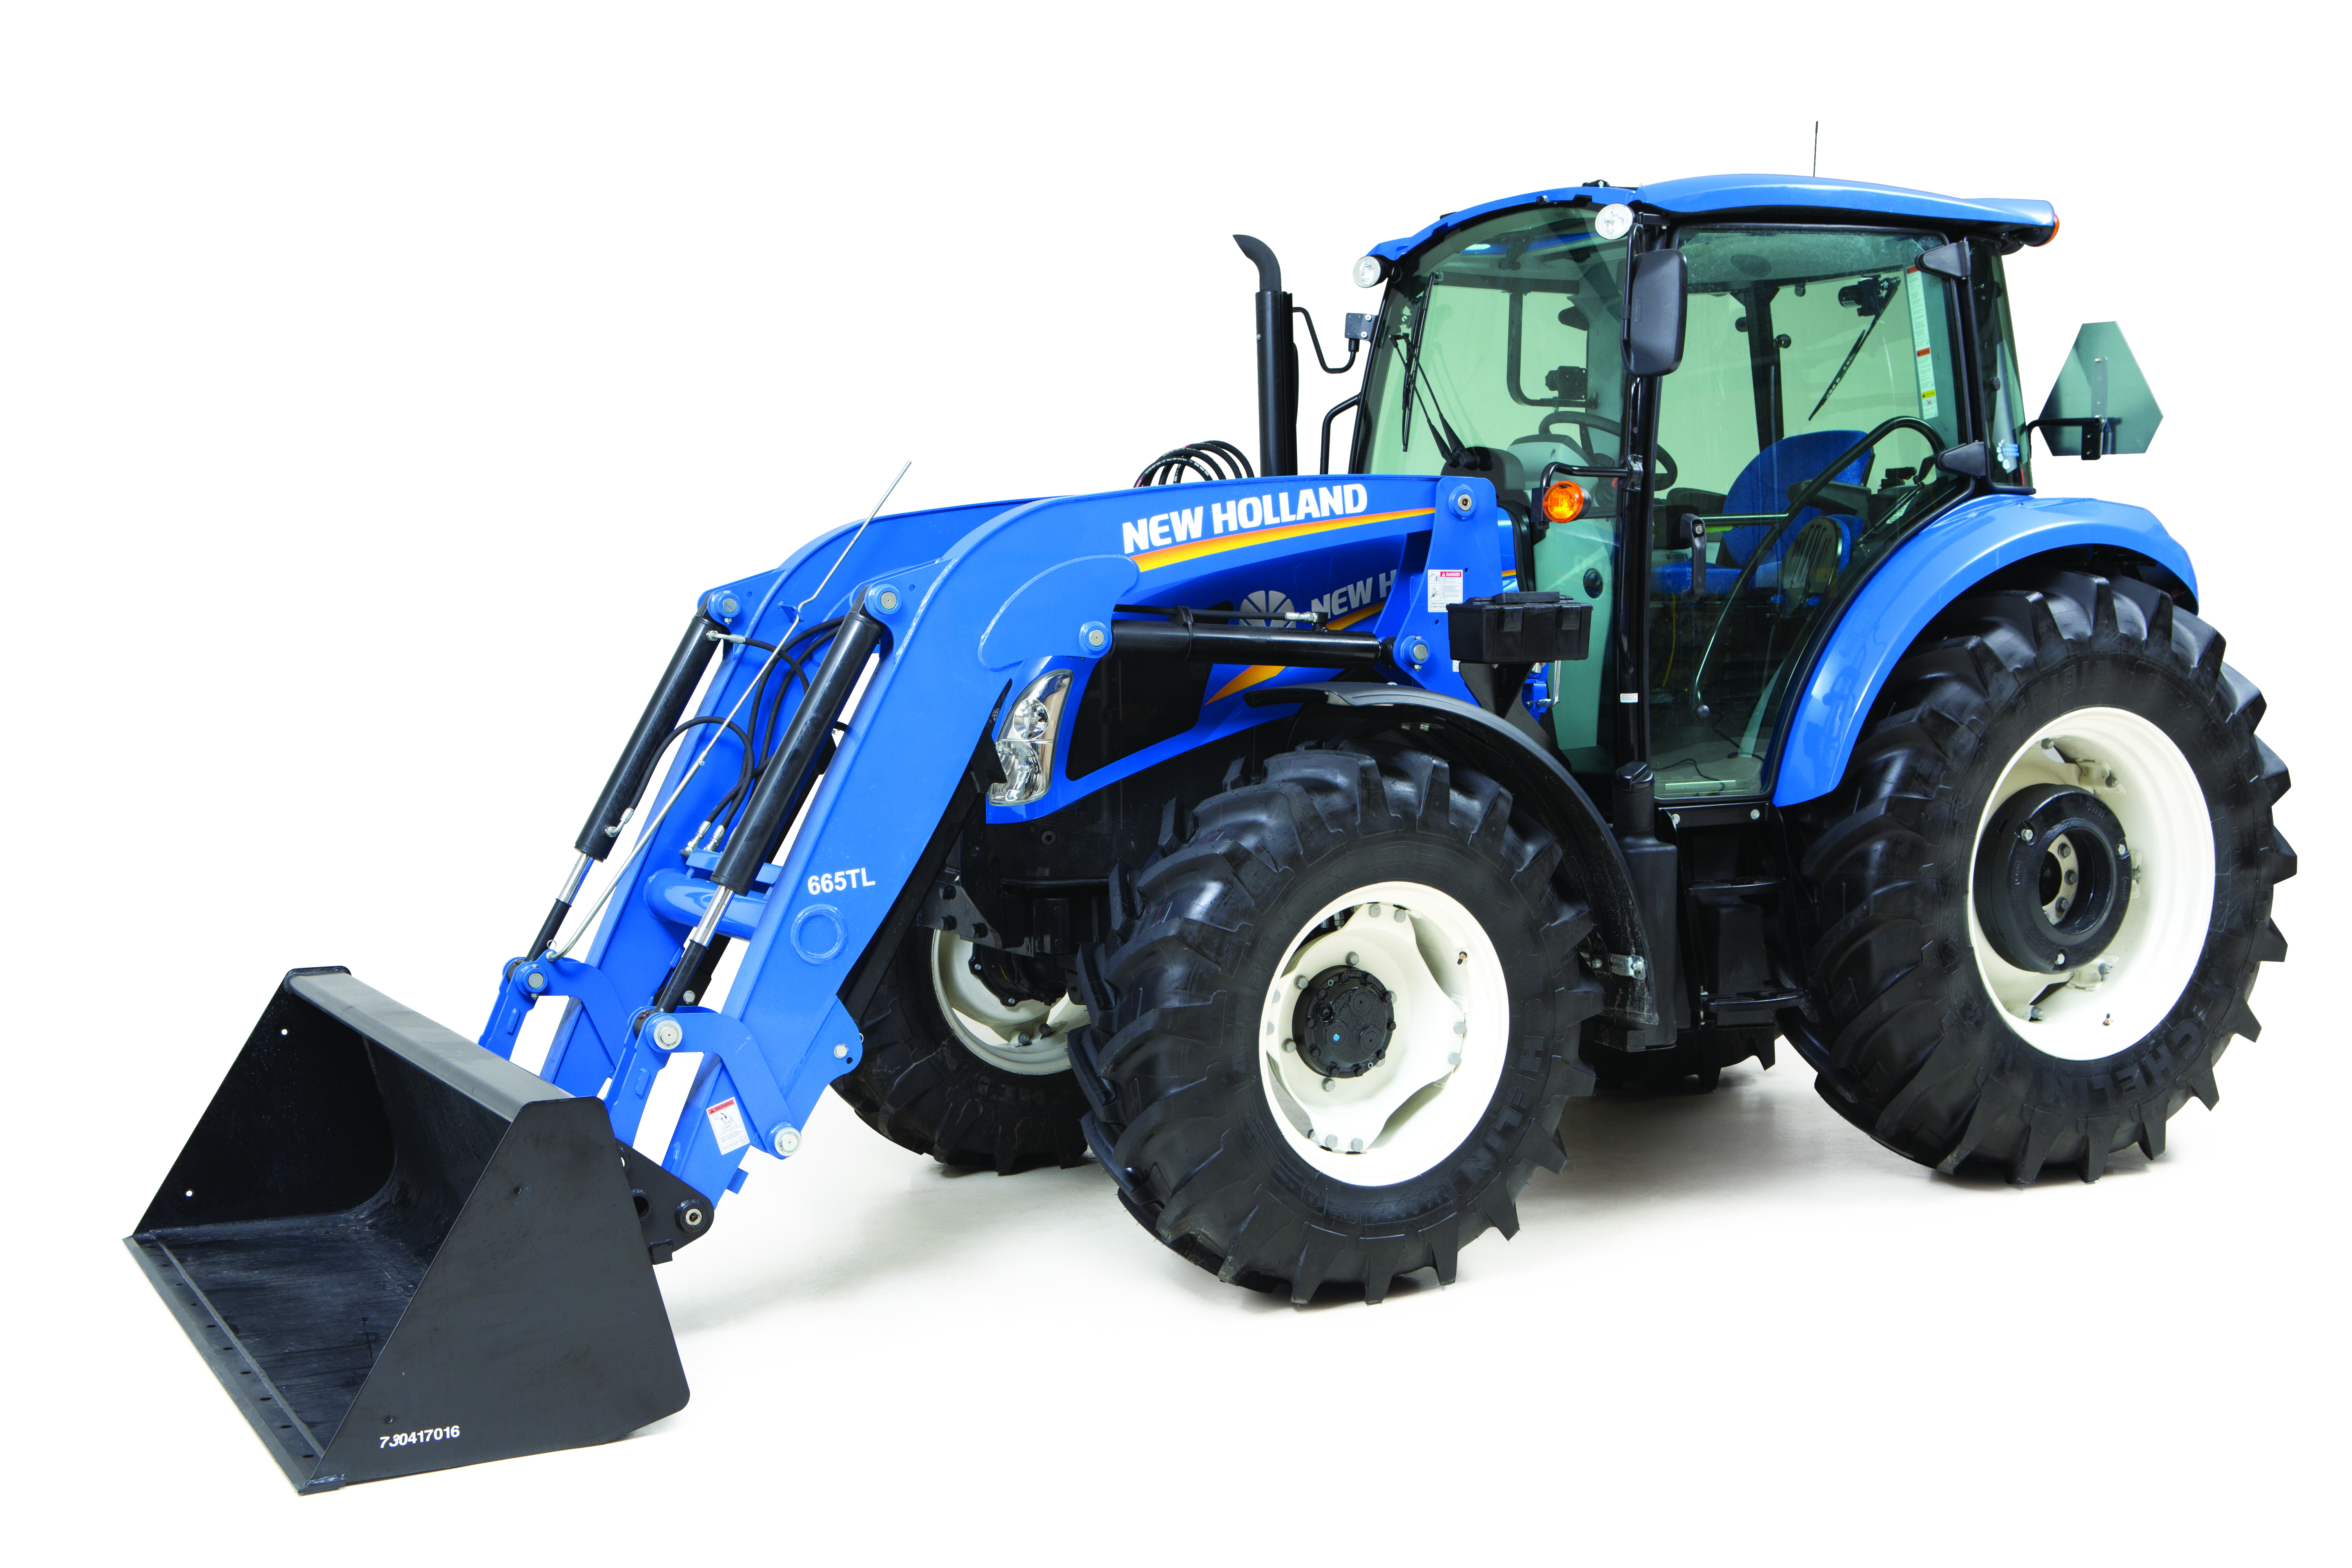 New Holland Dual Command T4 Series Utility Tractor